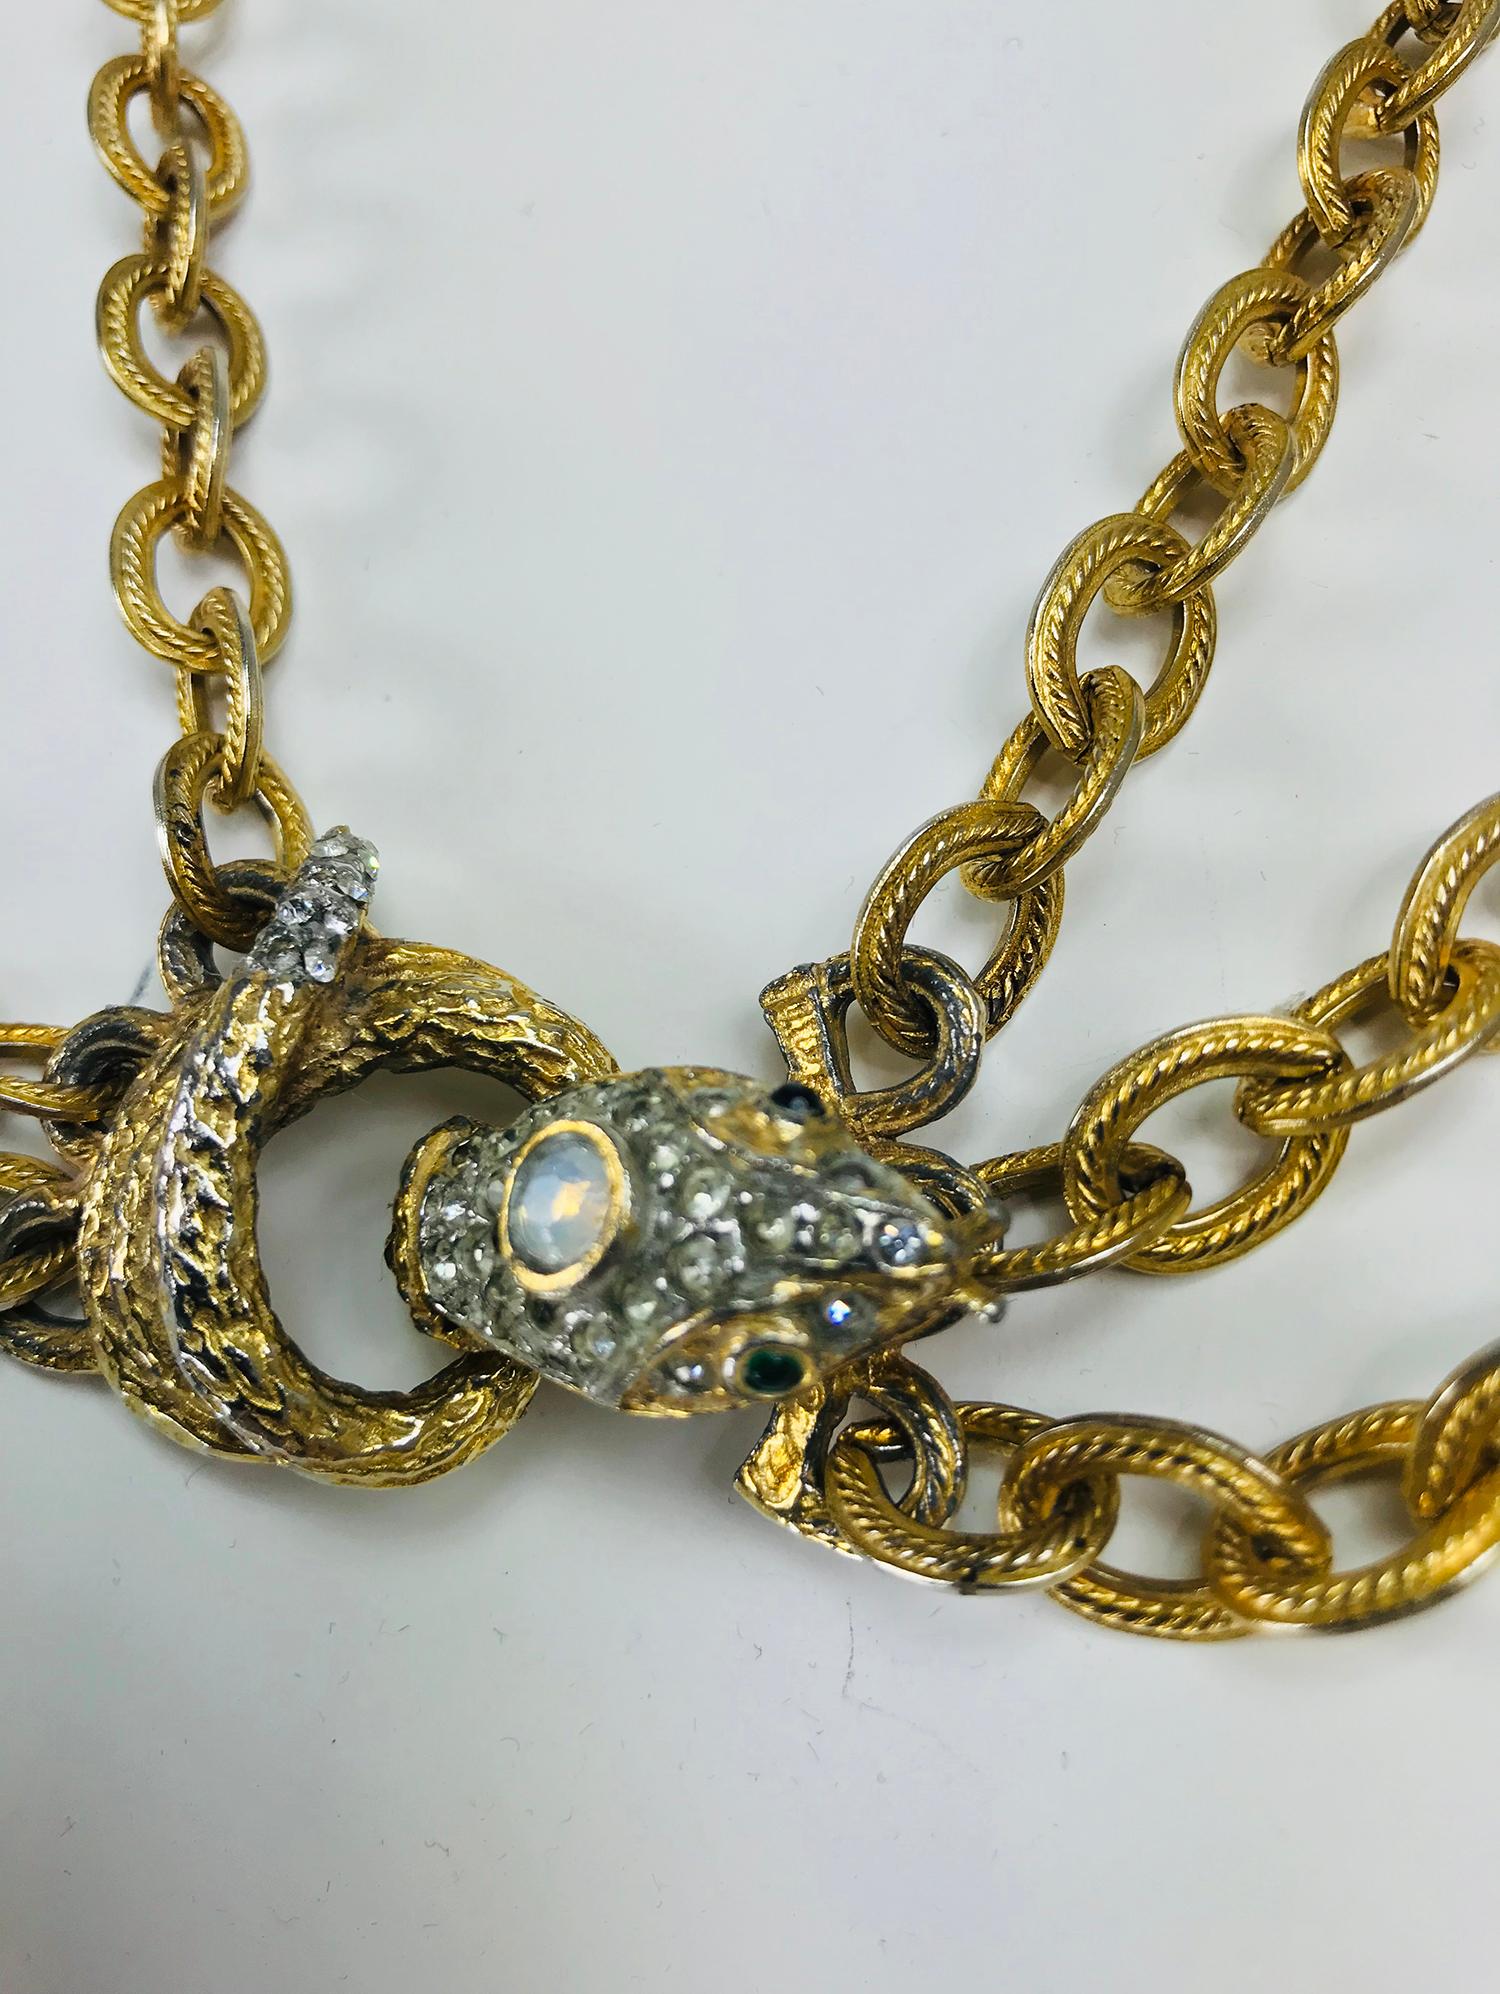 Snake festoon necklace in faux gold textured metal and crystal rhinestones, vintage. The links on the triple chains are oval and each nicely detailed. The centerpiece is the coiled snake who has a faux opal on top of it's head, faux emerald eyes and